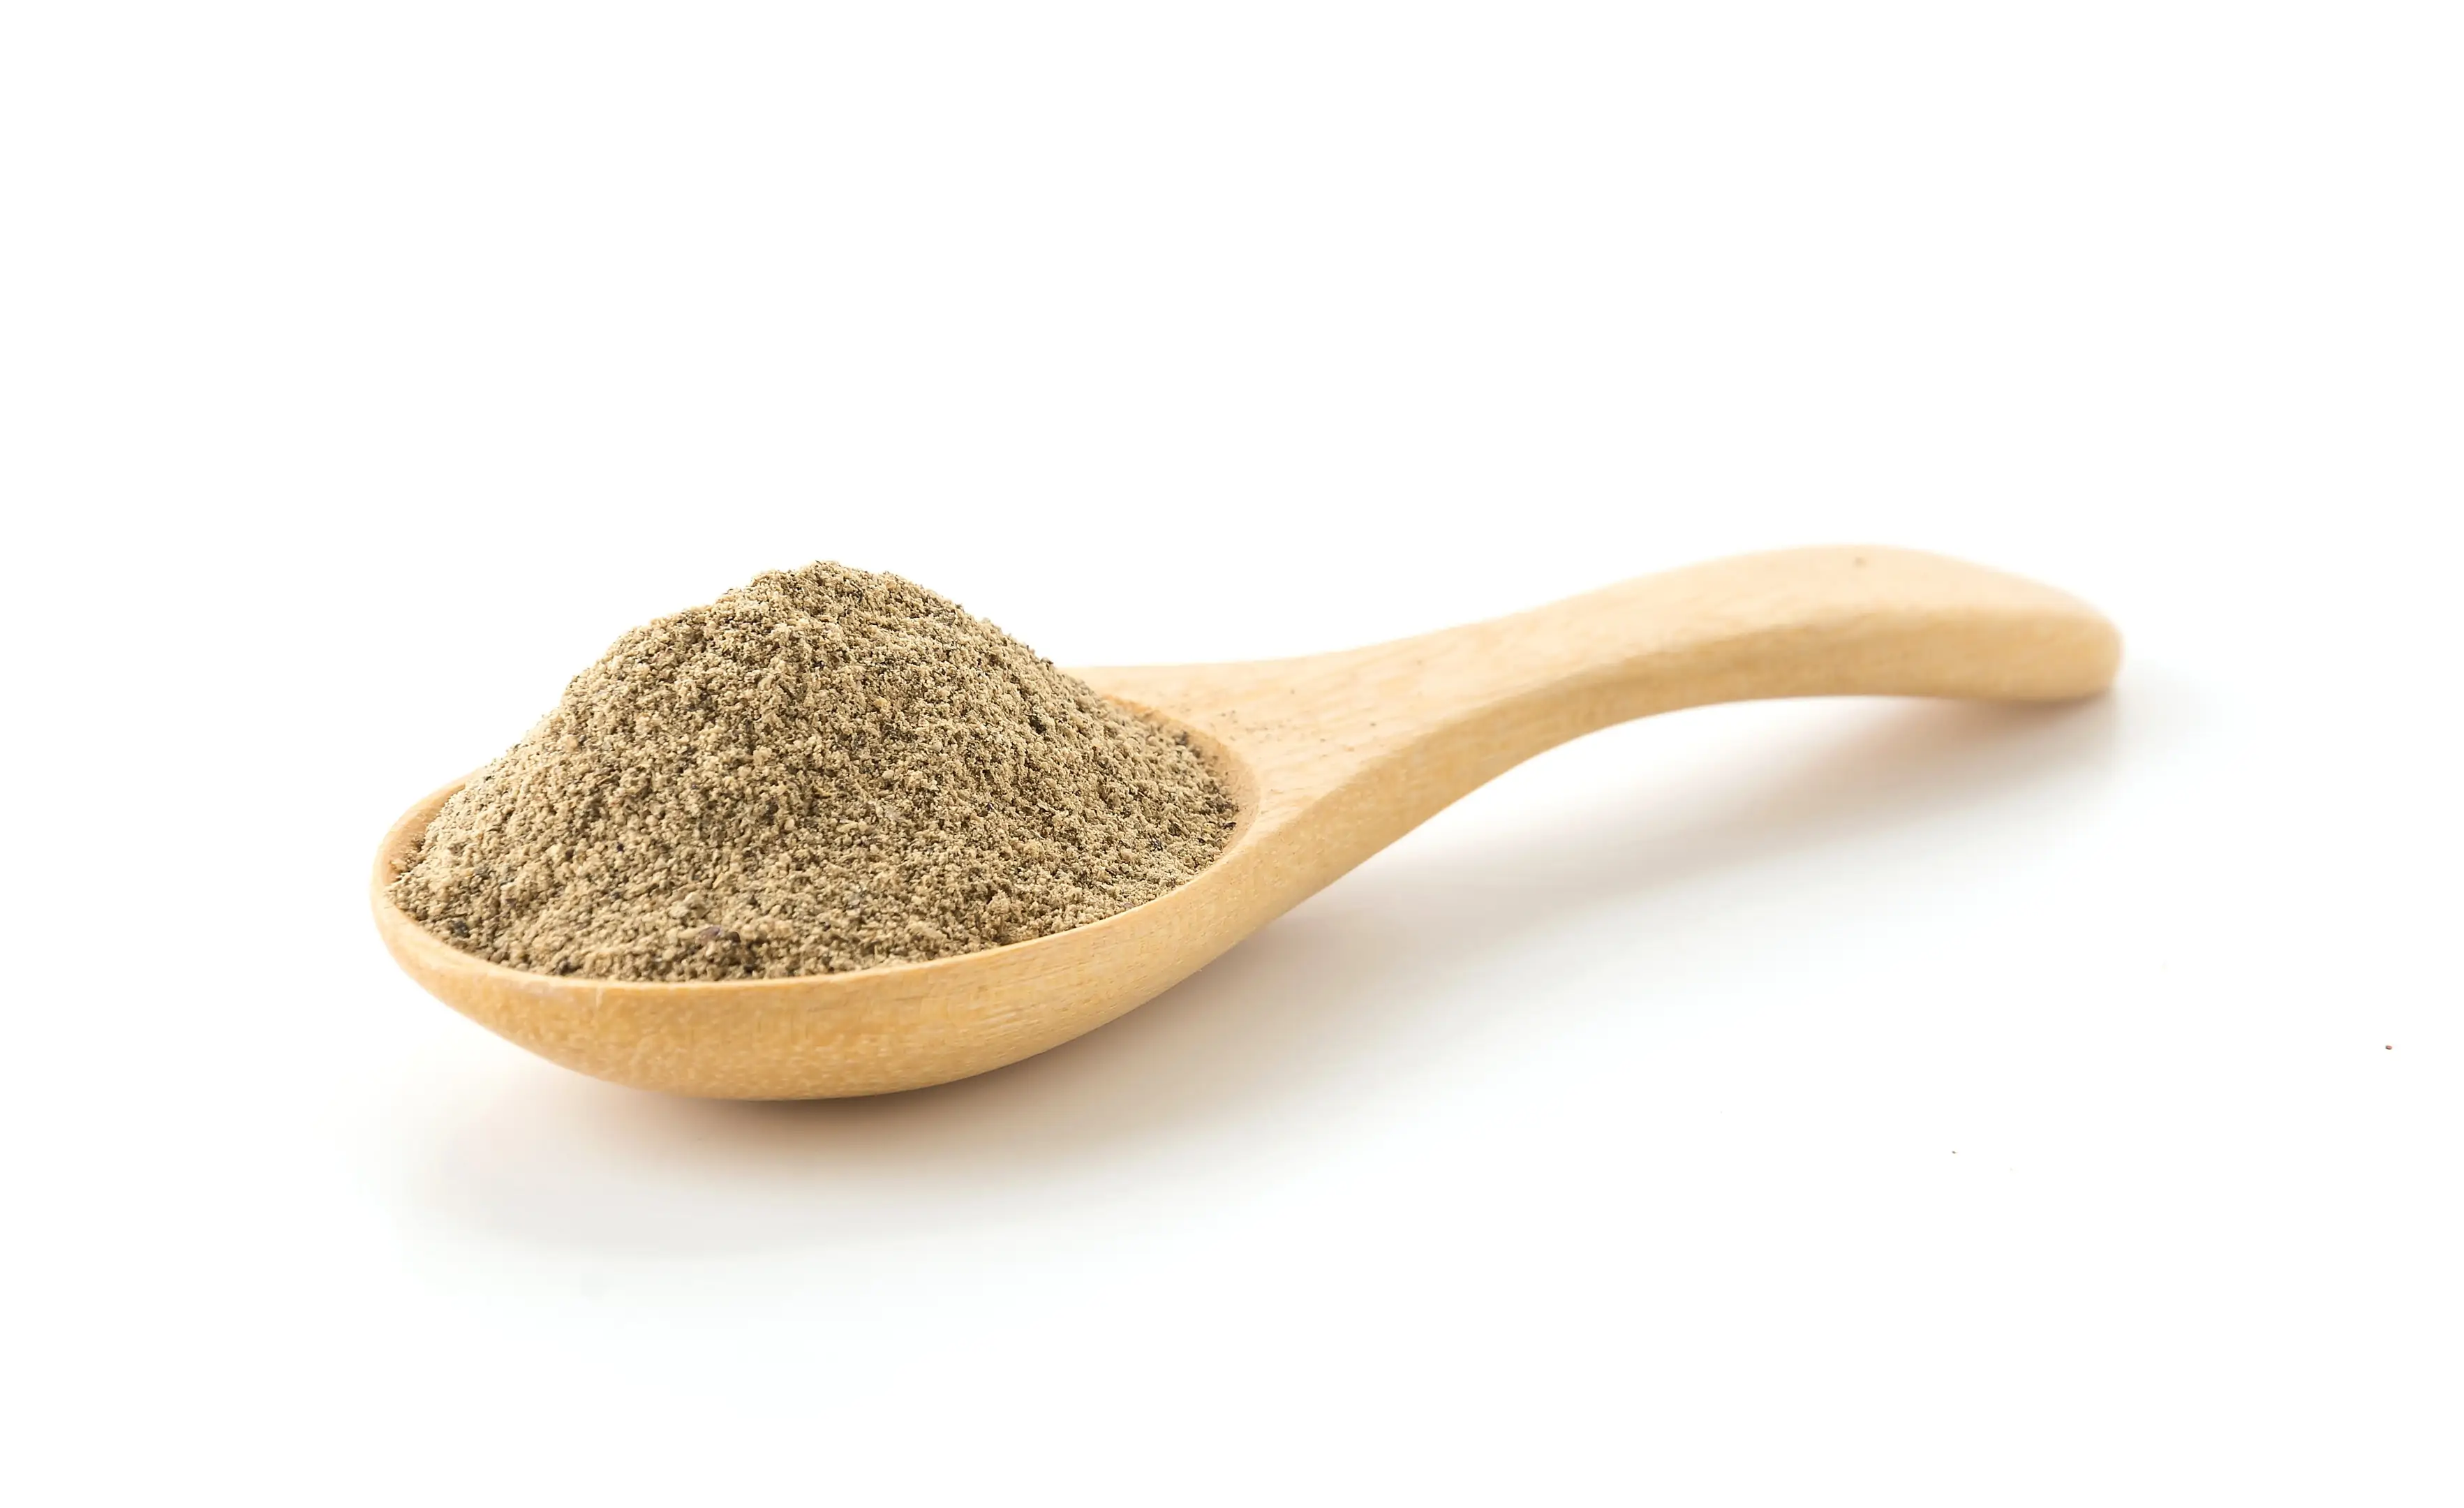 Vekhand powder on a wooden spoon